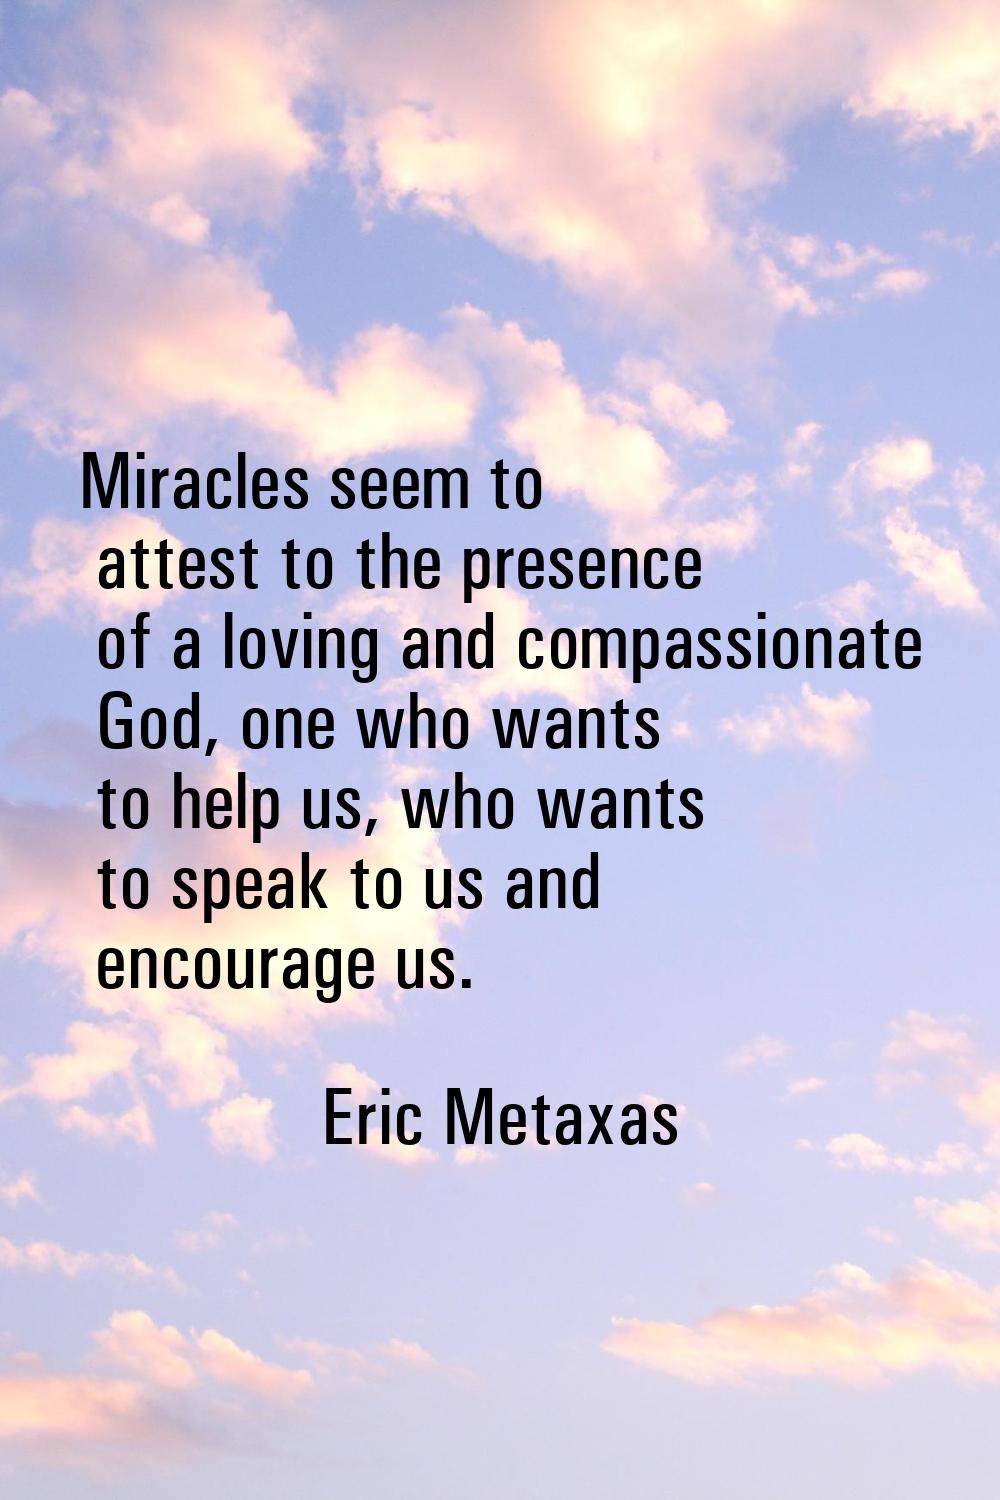 Miracles seem to attest to the presence of a loving and compassionate God, one who wants to help us